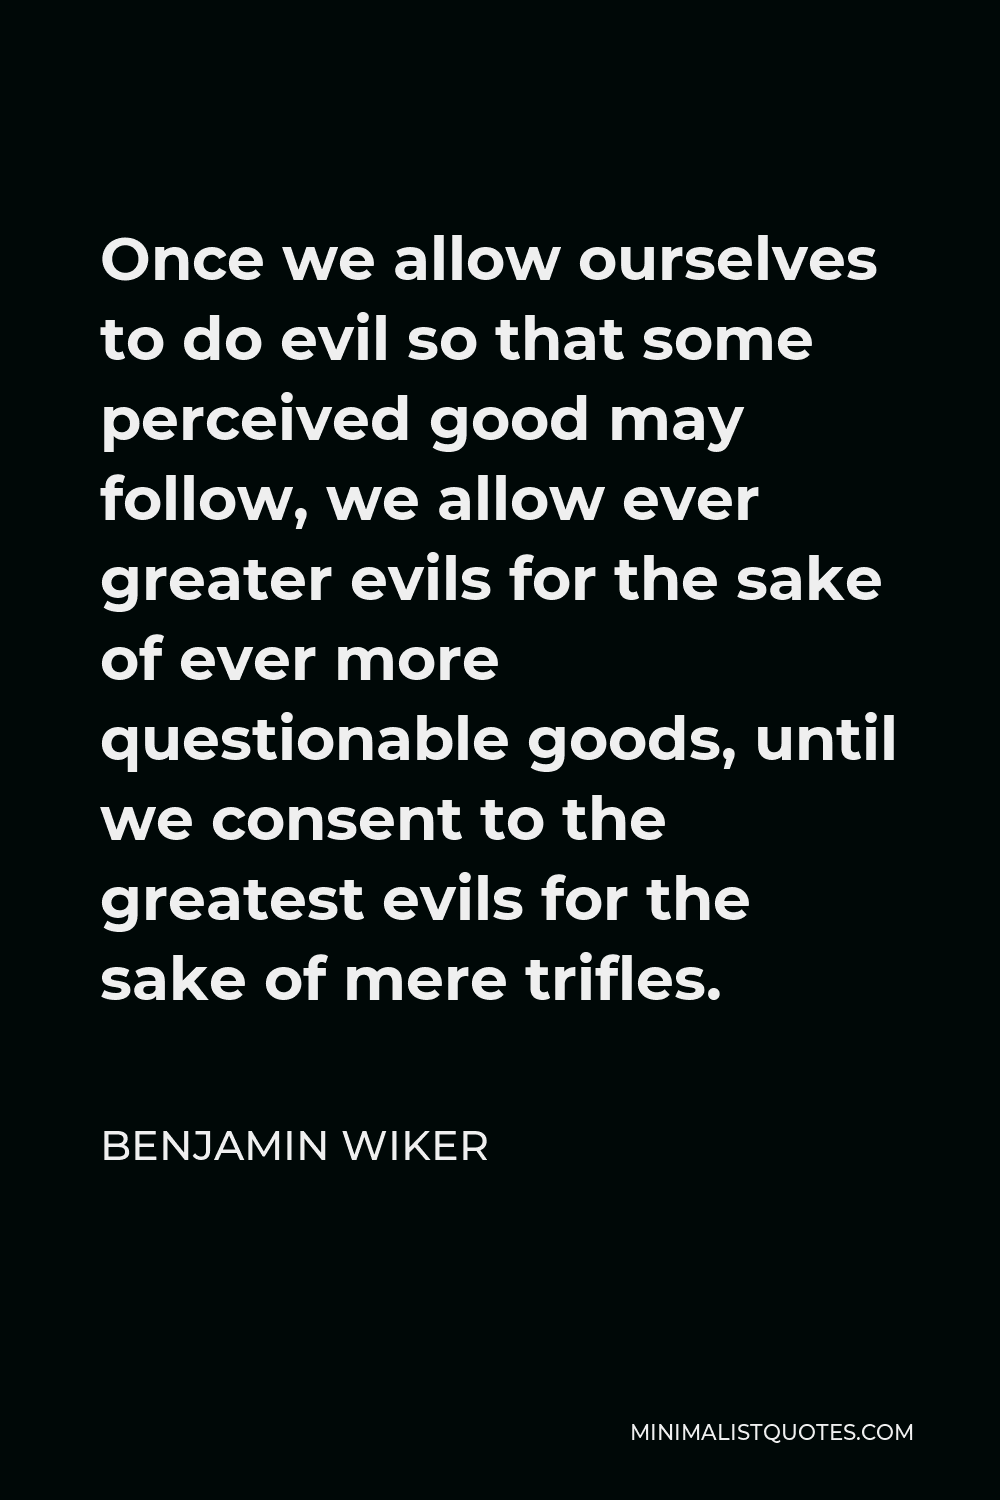 Benjamin Wiker Quote - Once we allow ourselves to do evil so that some perceived good may follow, we allow ever greater evils for the sake of ever more questionable goods, until we consent to the greatest evils for the sake of mere trifles.